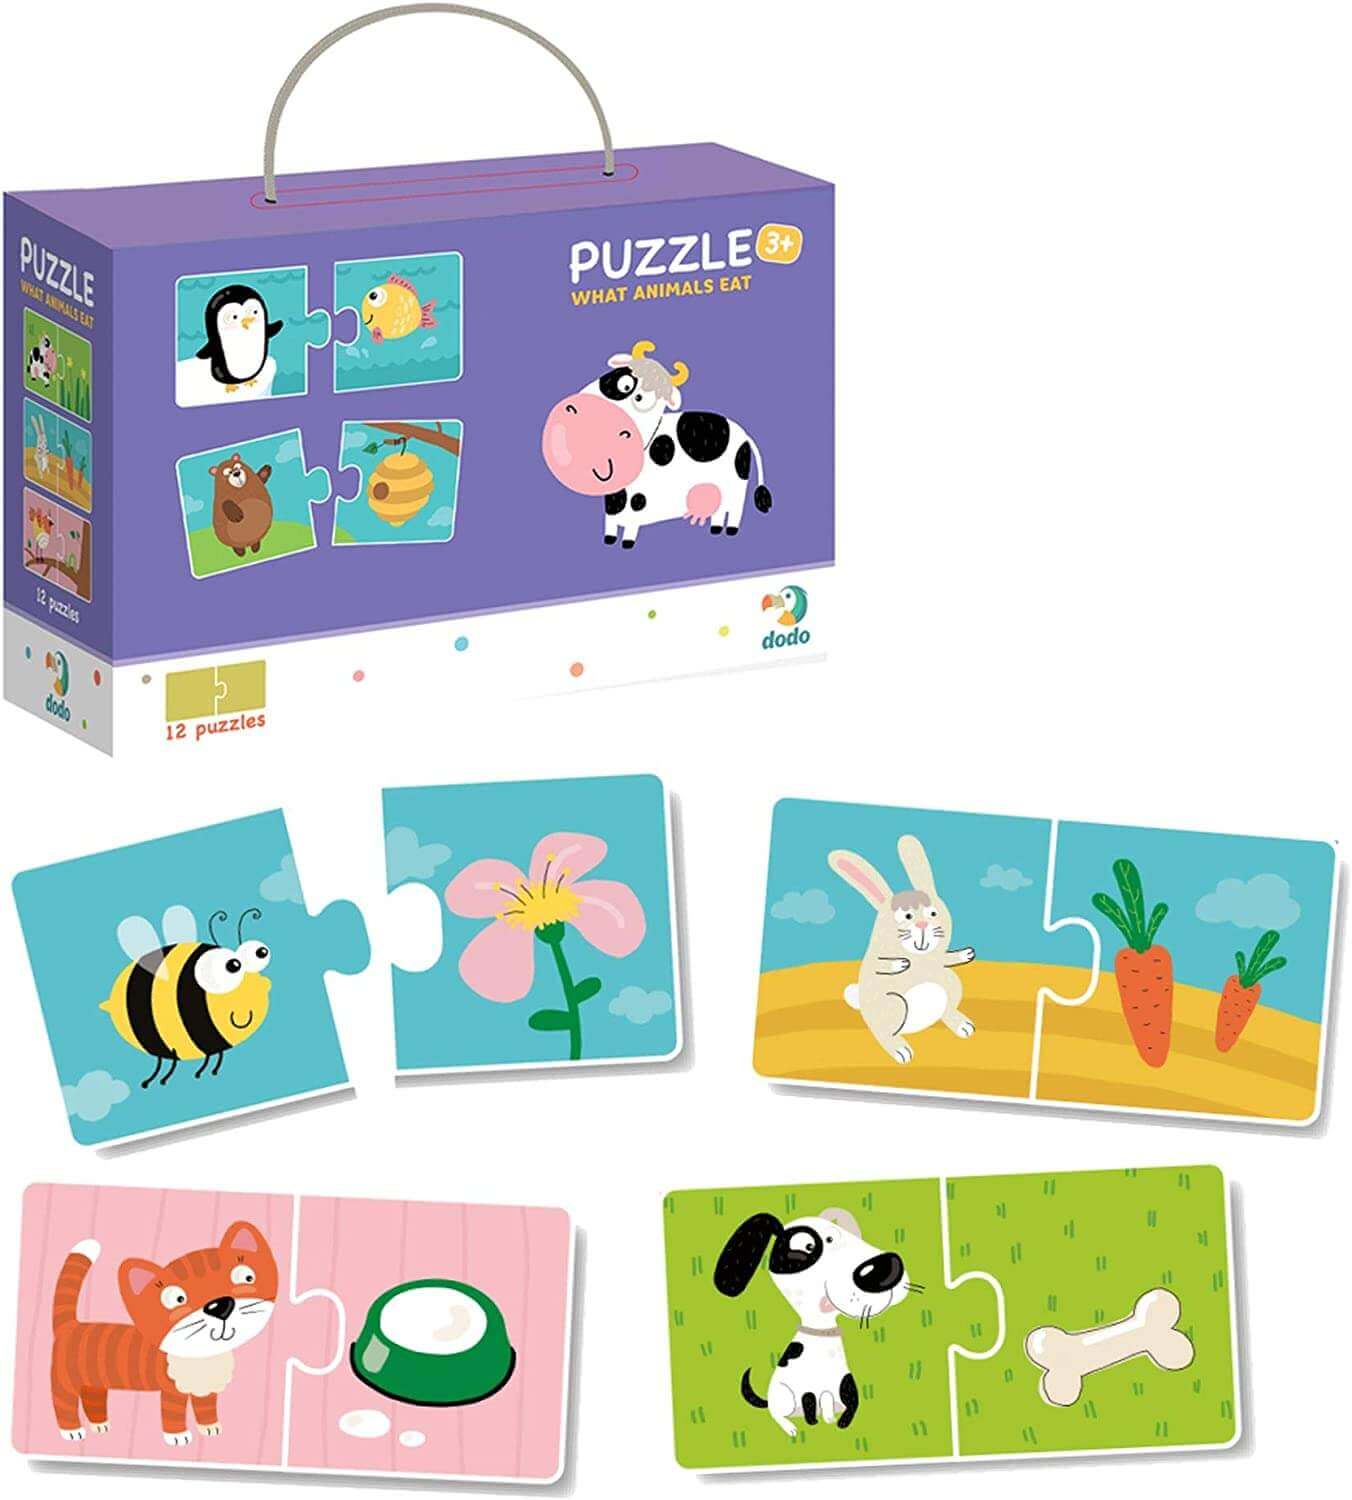 Jigsaw 2pc Puzzle, What Animals Eat 12 Puzzles, Cubika, eco-friendly Toys, Mountain Kids Toys